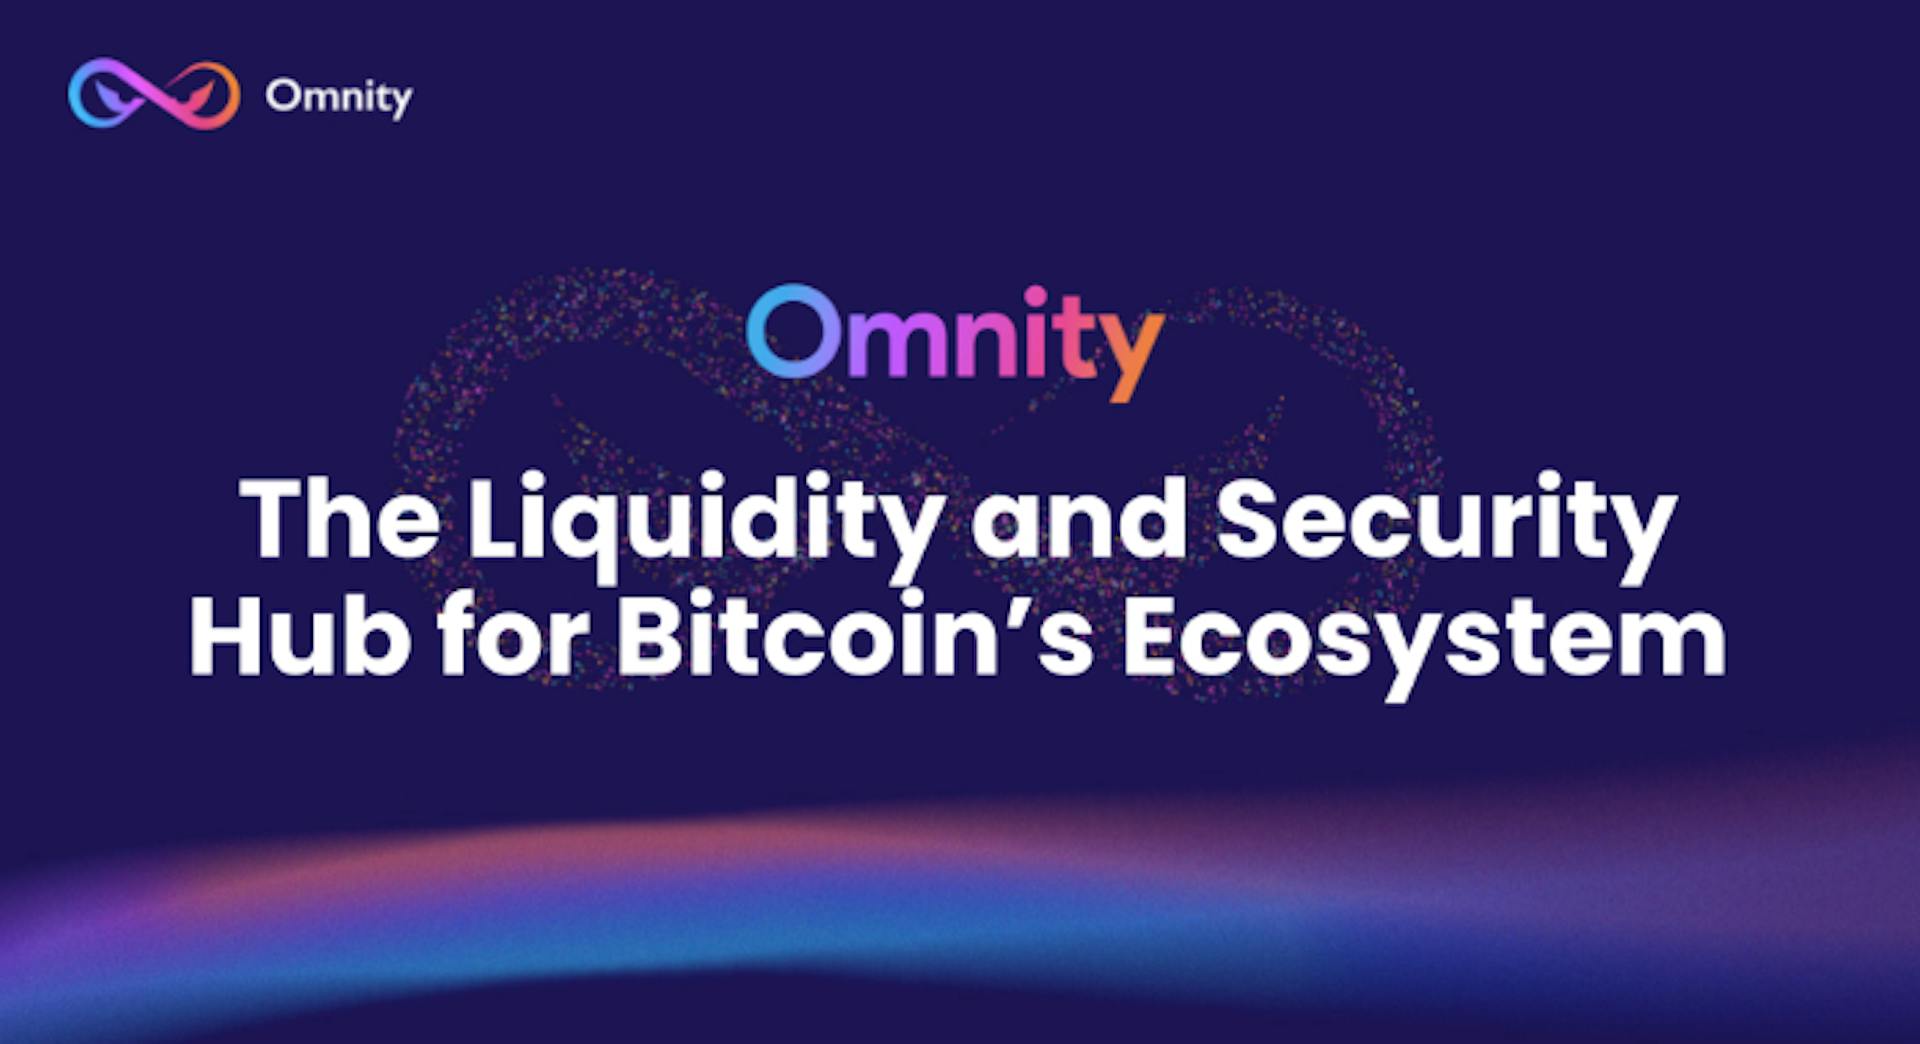 featured image - Omnity Network's Fully Onchain Hub Announces Bitcoin Staking and Shared Security